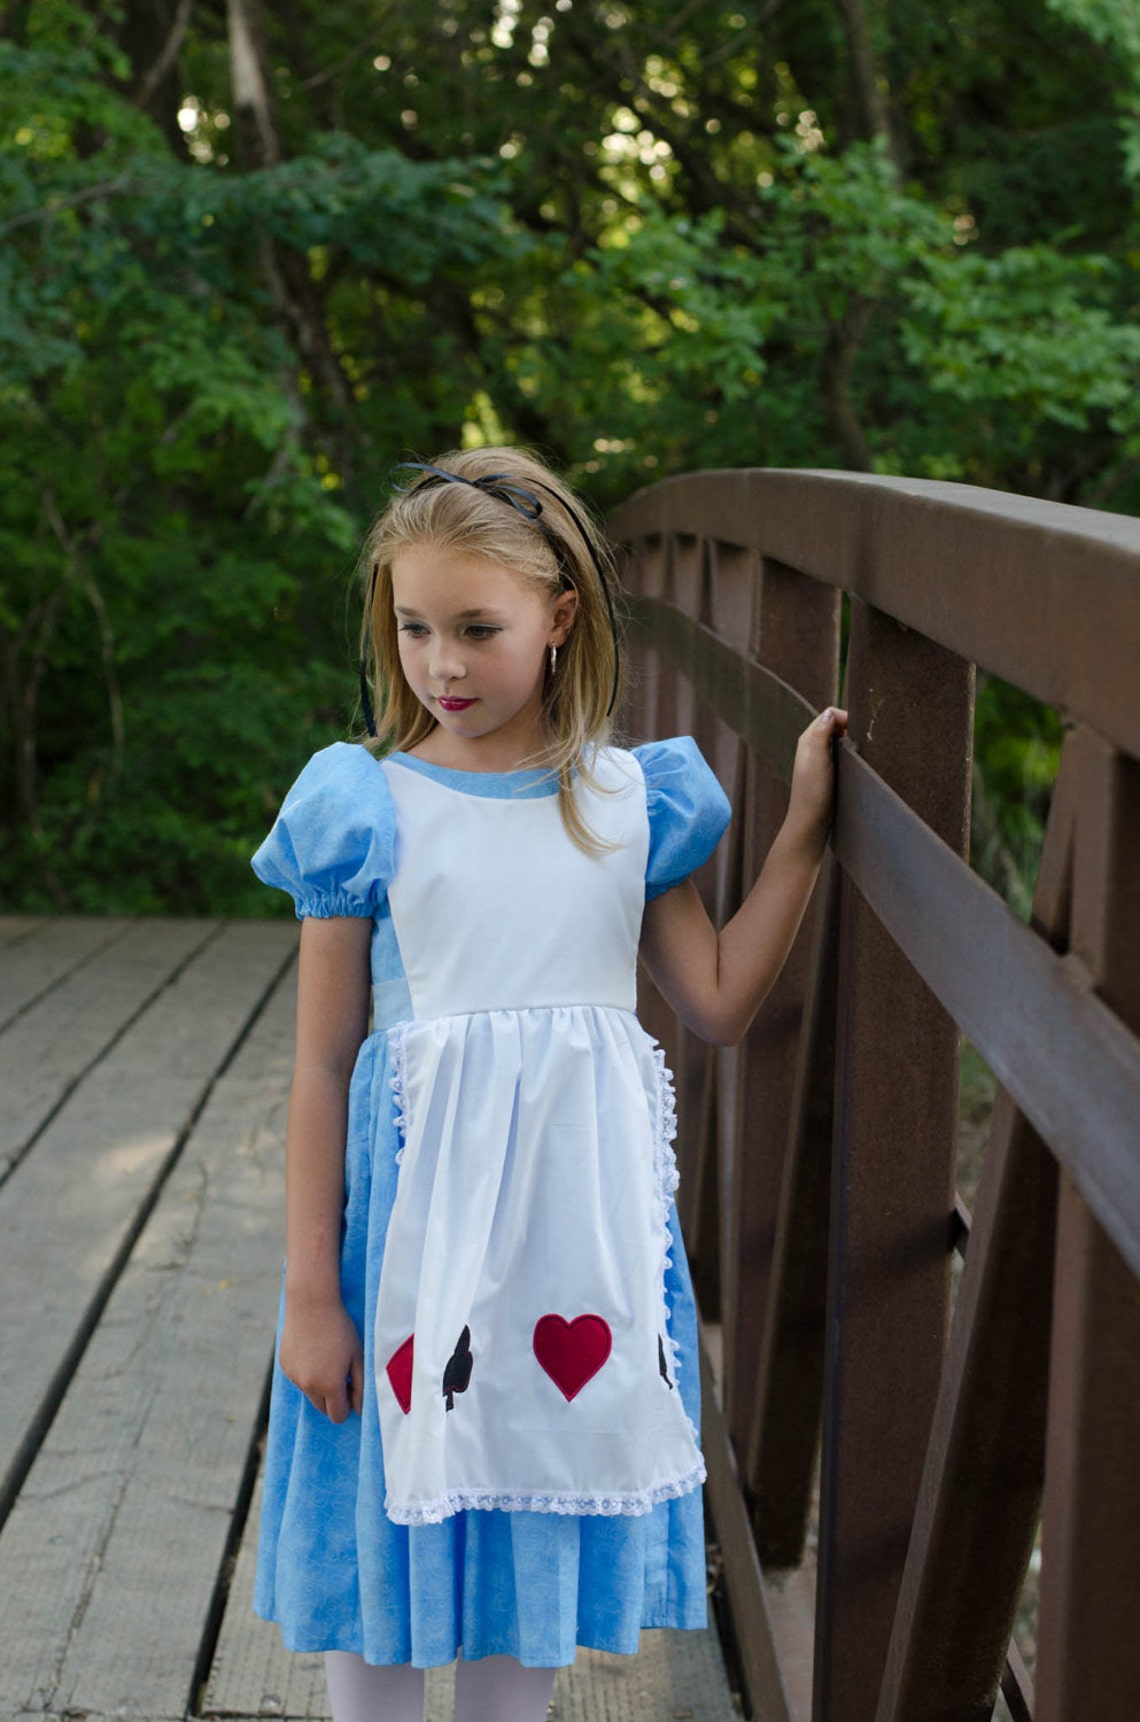 Cute Alice in Wonderland Girls Costume Dress playing cards | Etsy